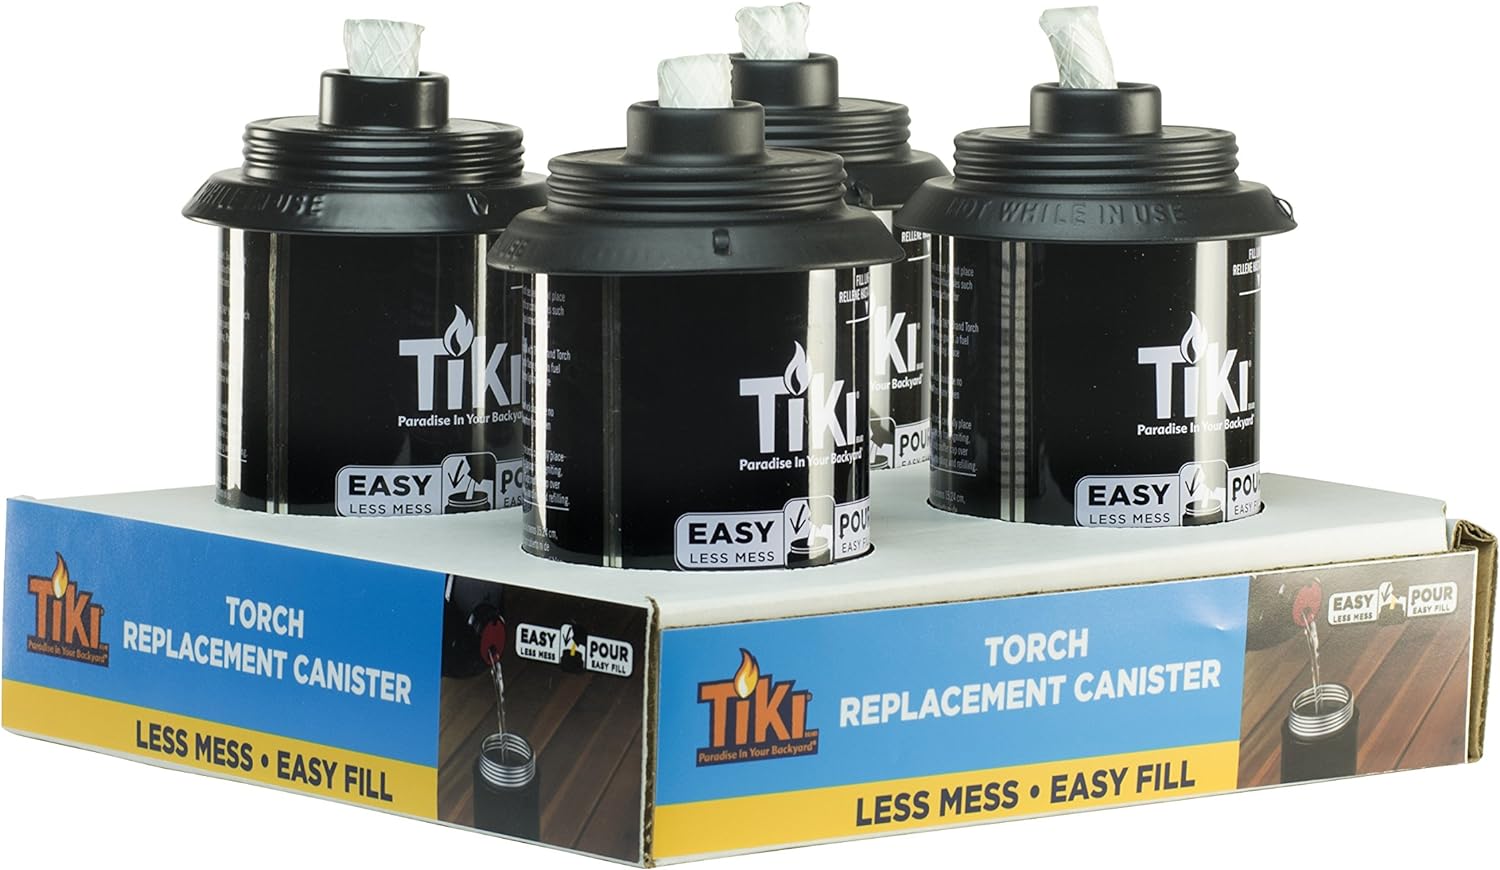 TIKI 1317221 12 oz. Torch Replacement Canister with Easy Pour System, 12 Ounce (Pack of 4)